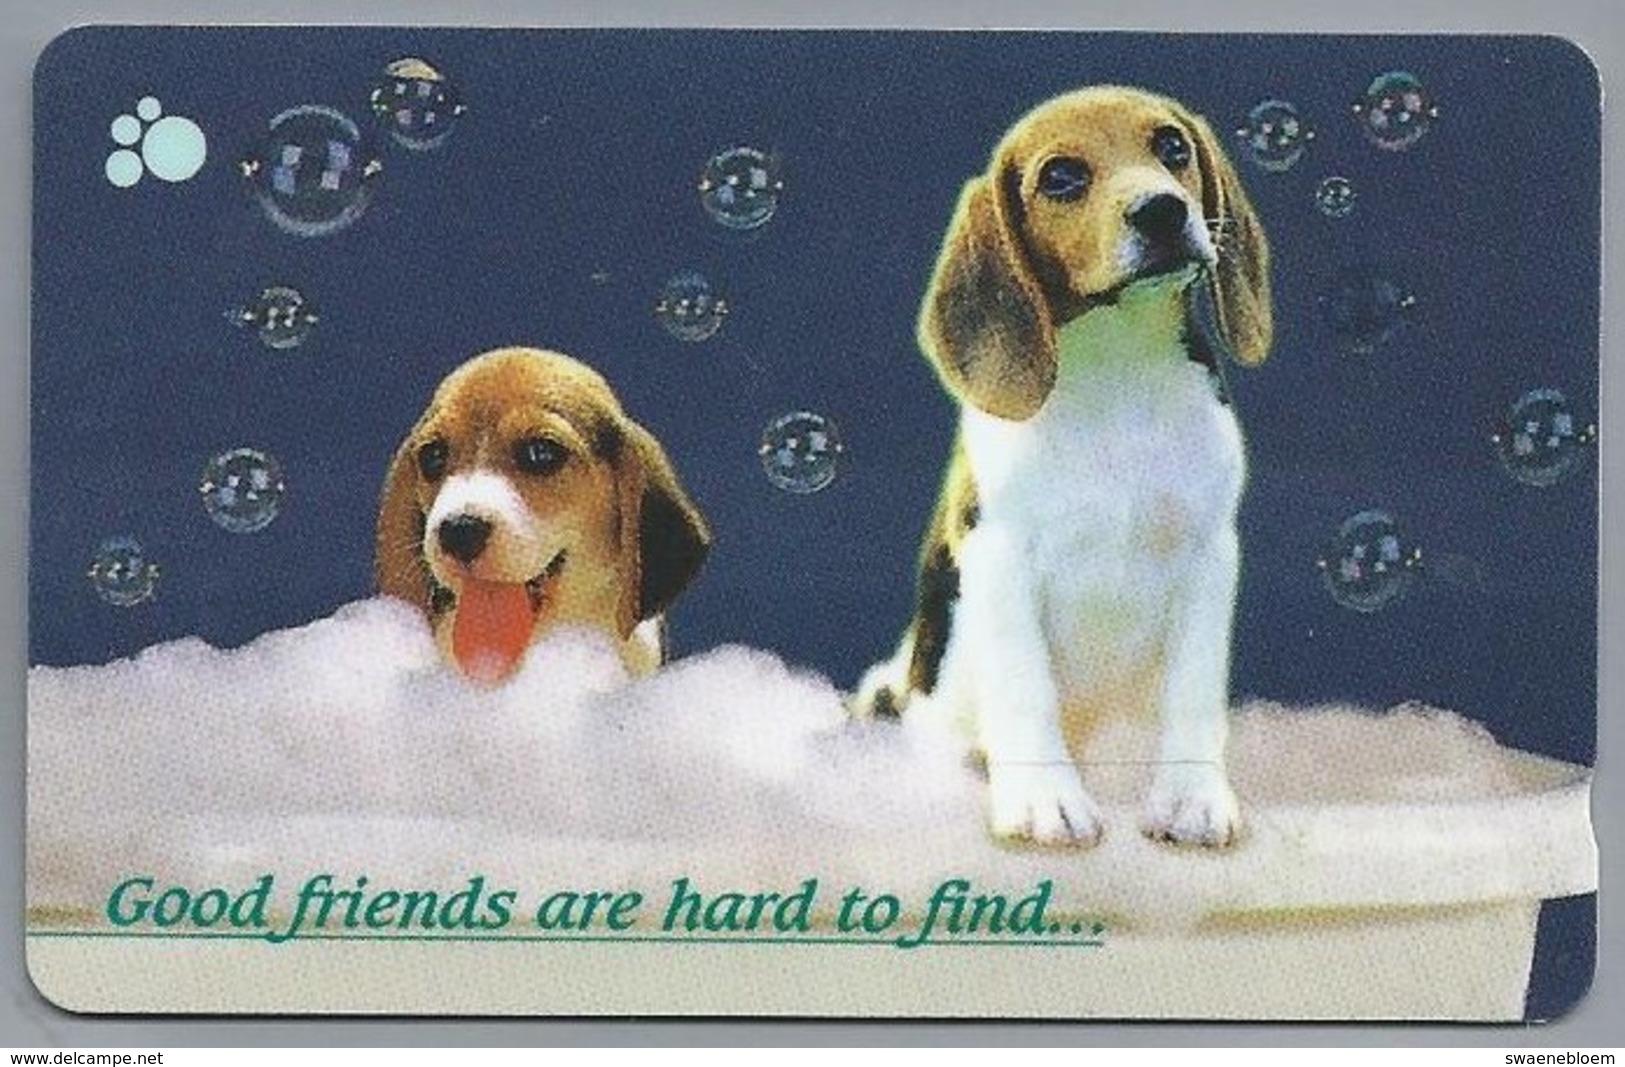 SG.- SINGAPORE TELECOM. $ 10. - Good Friends Are Hard To Find....- 133SIGA -. 2 Scans. - Honden